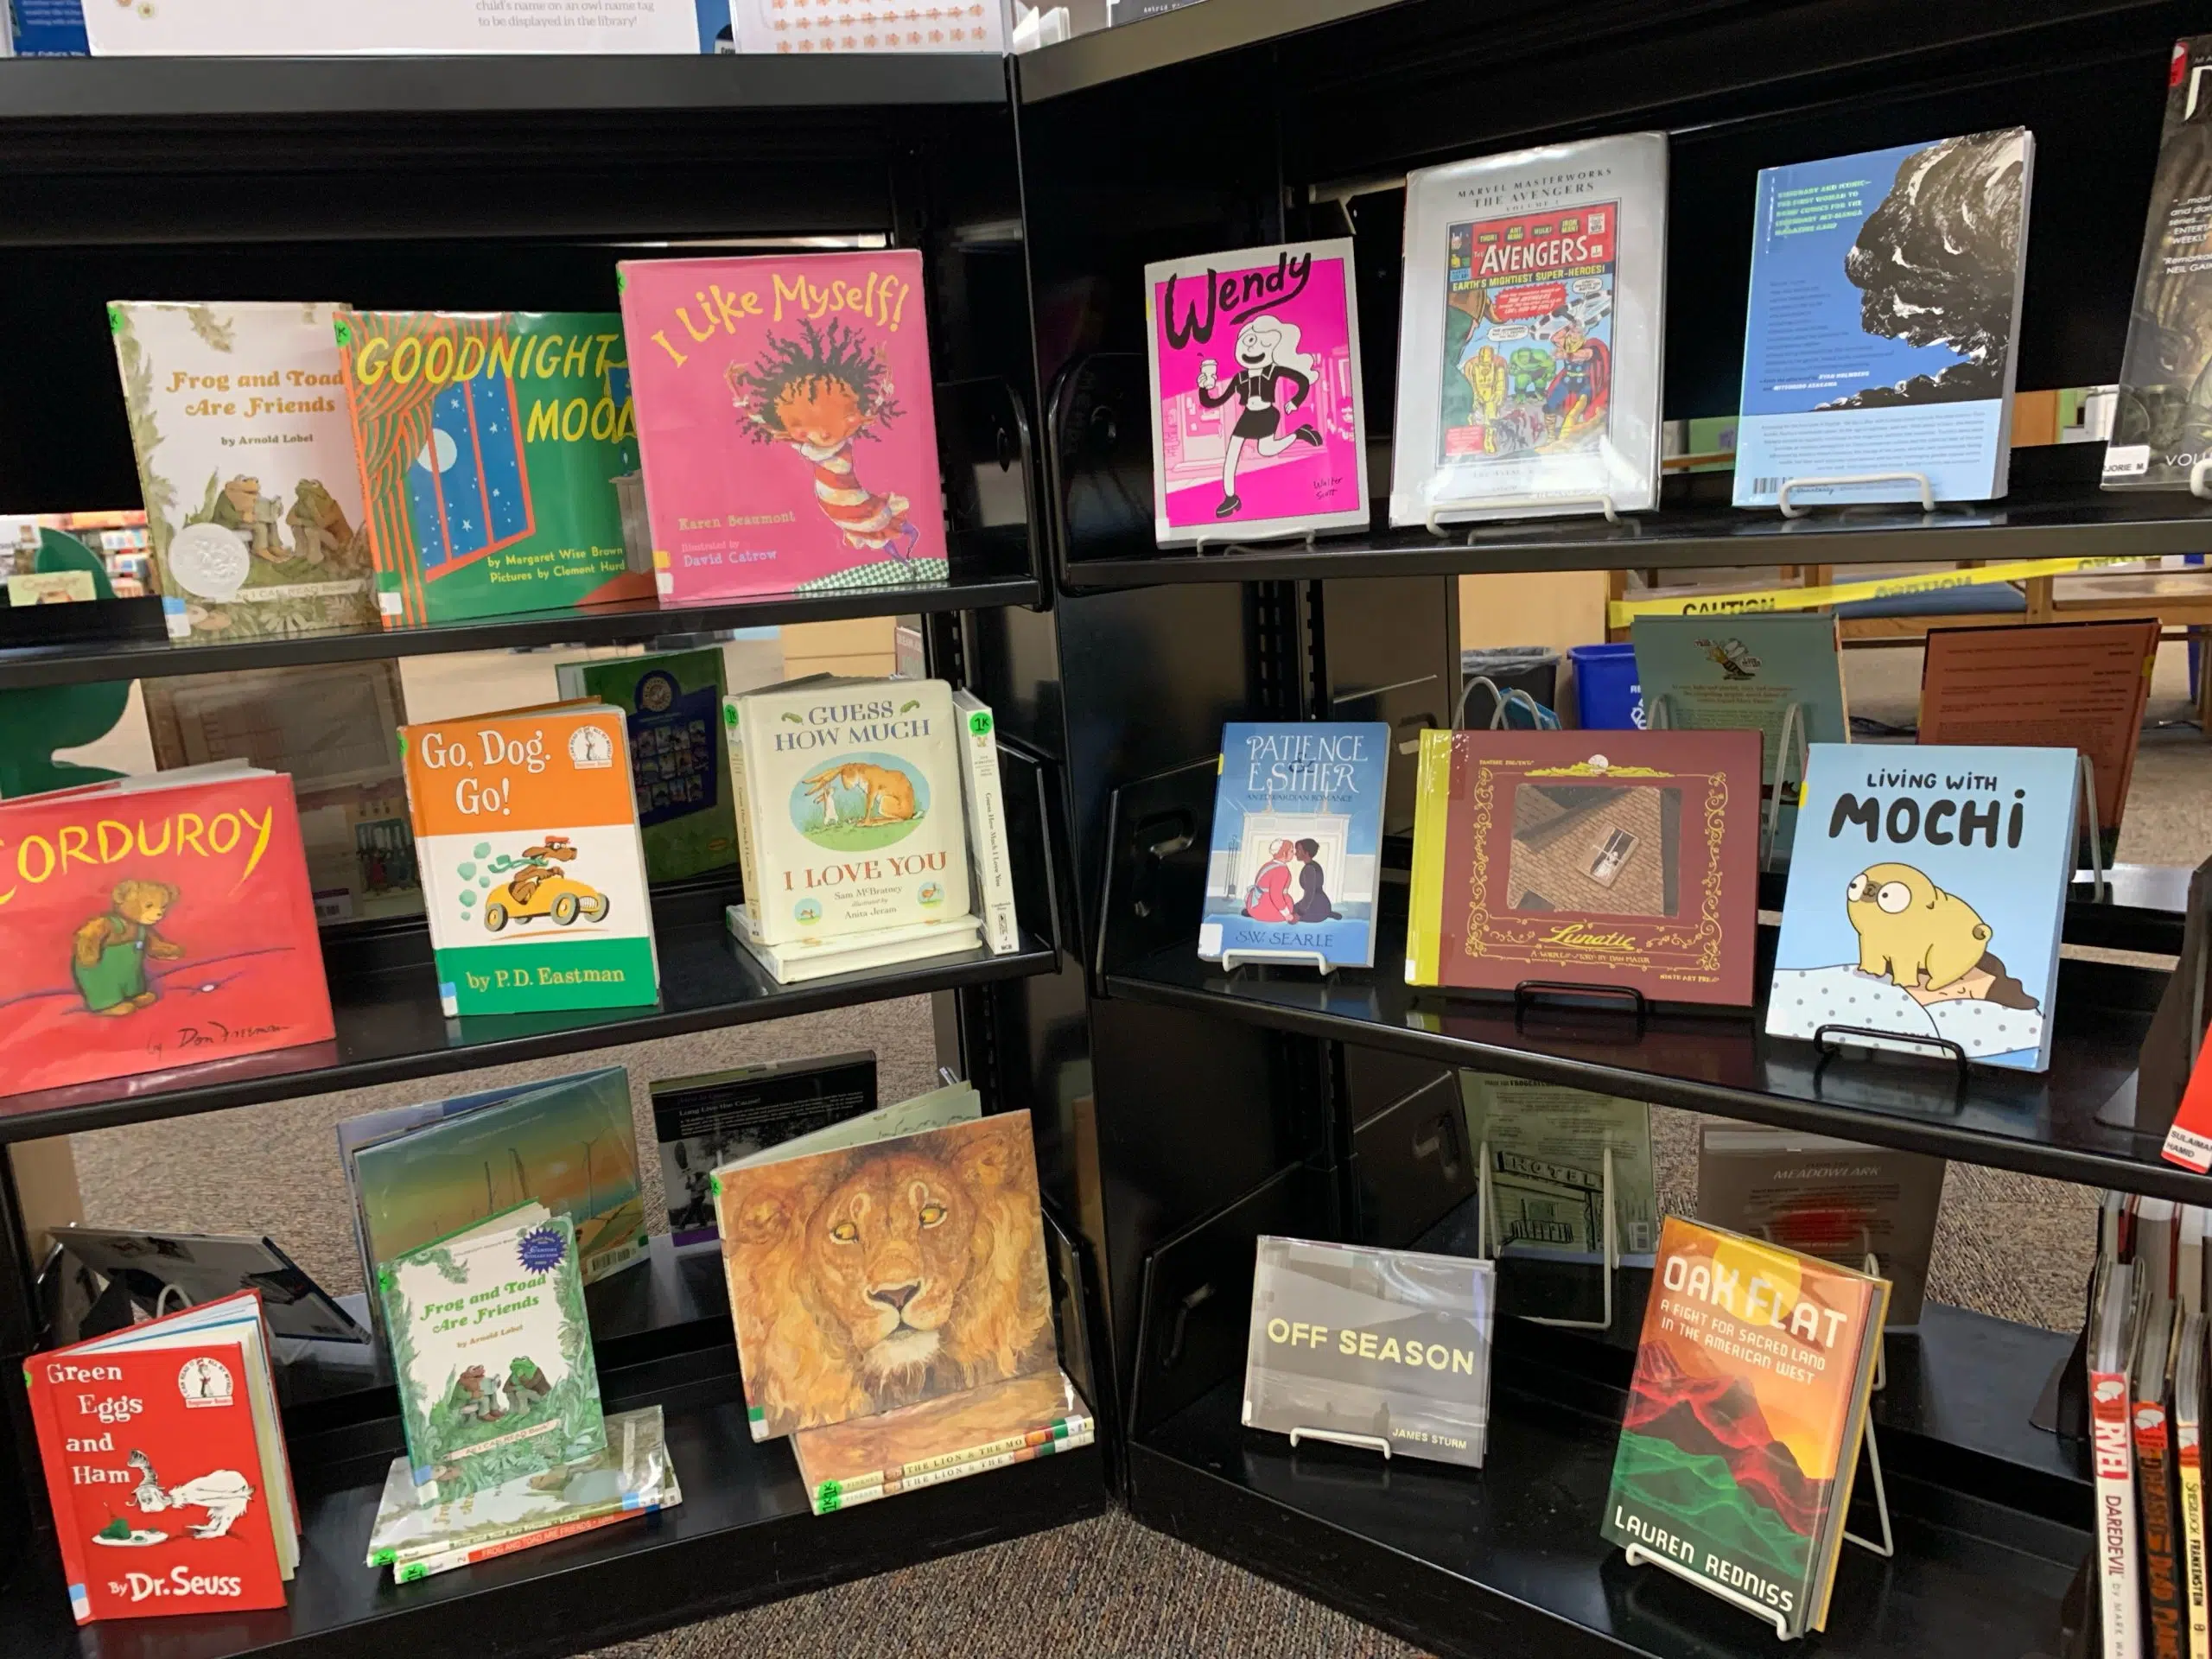 Public Library Displaying Sexually Explicit Books With Children's Books